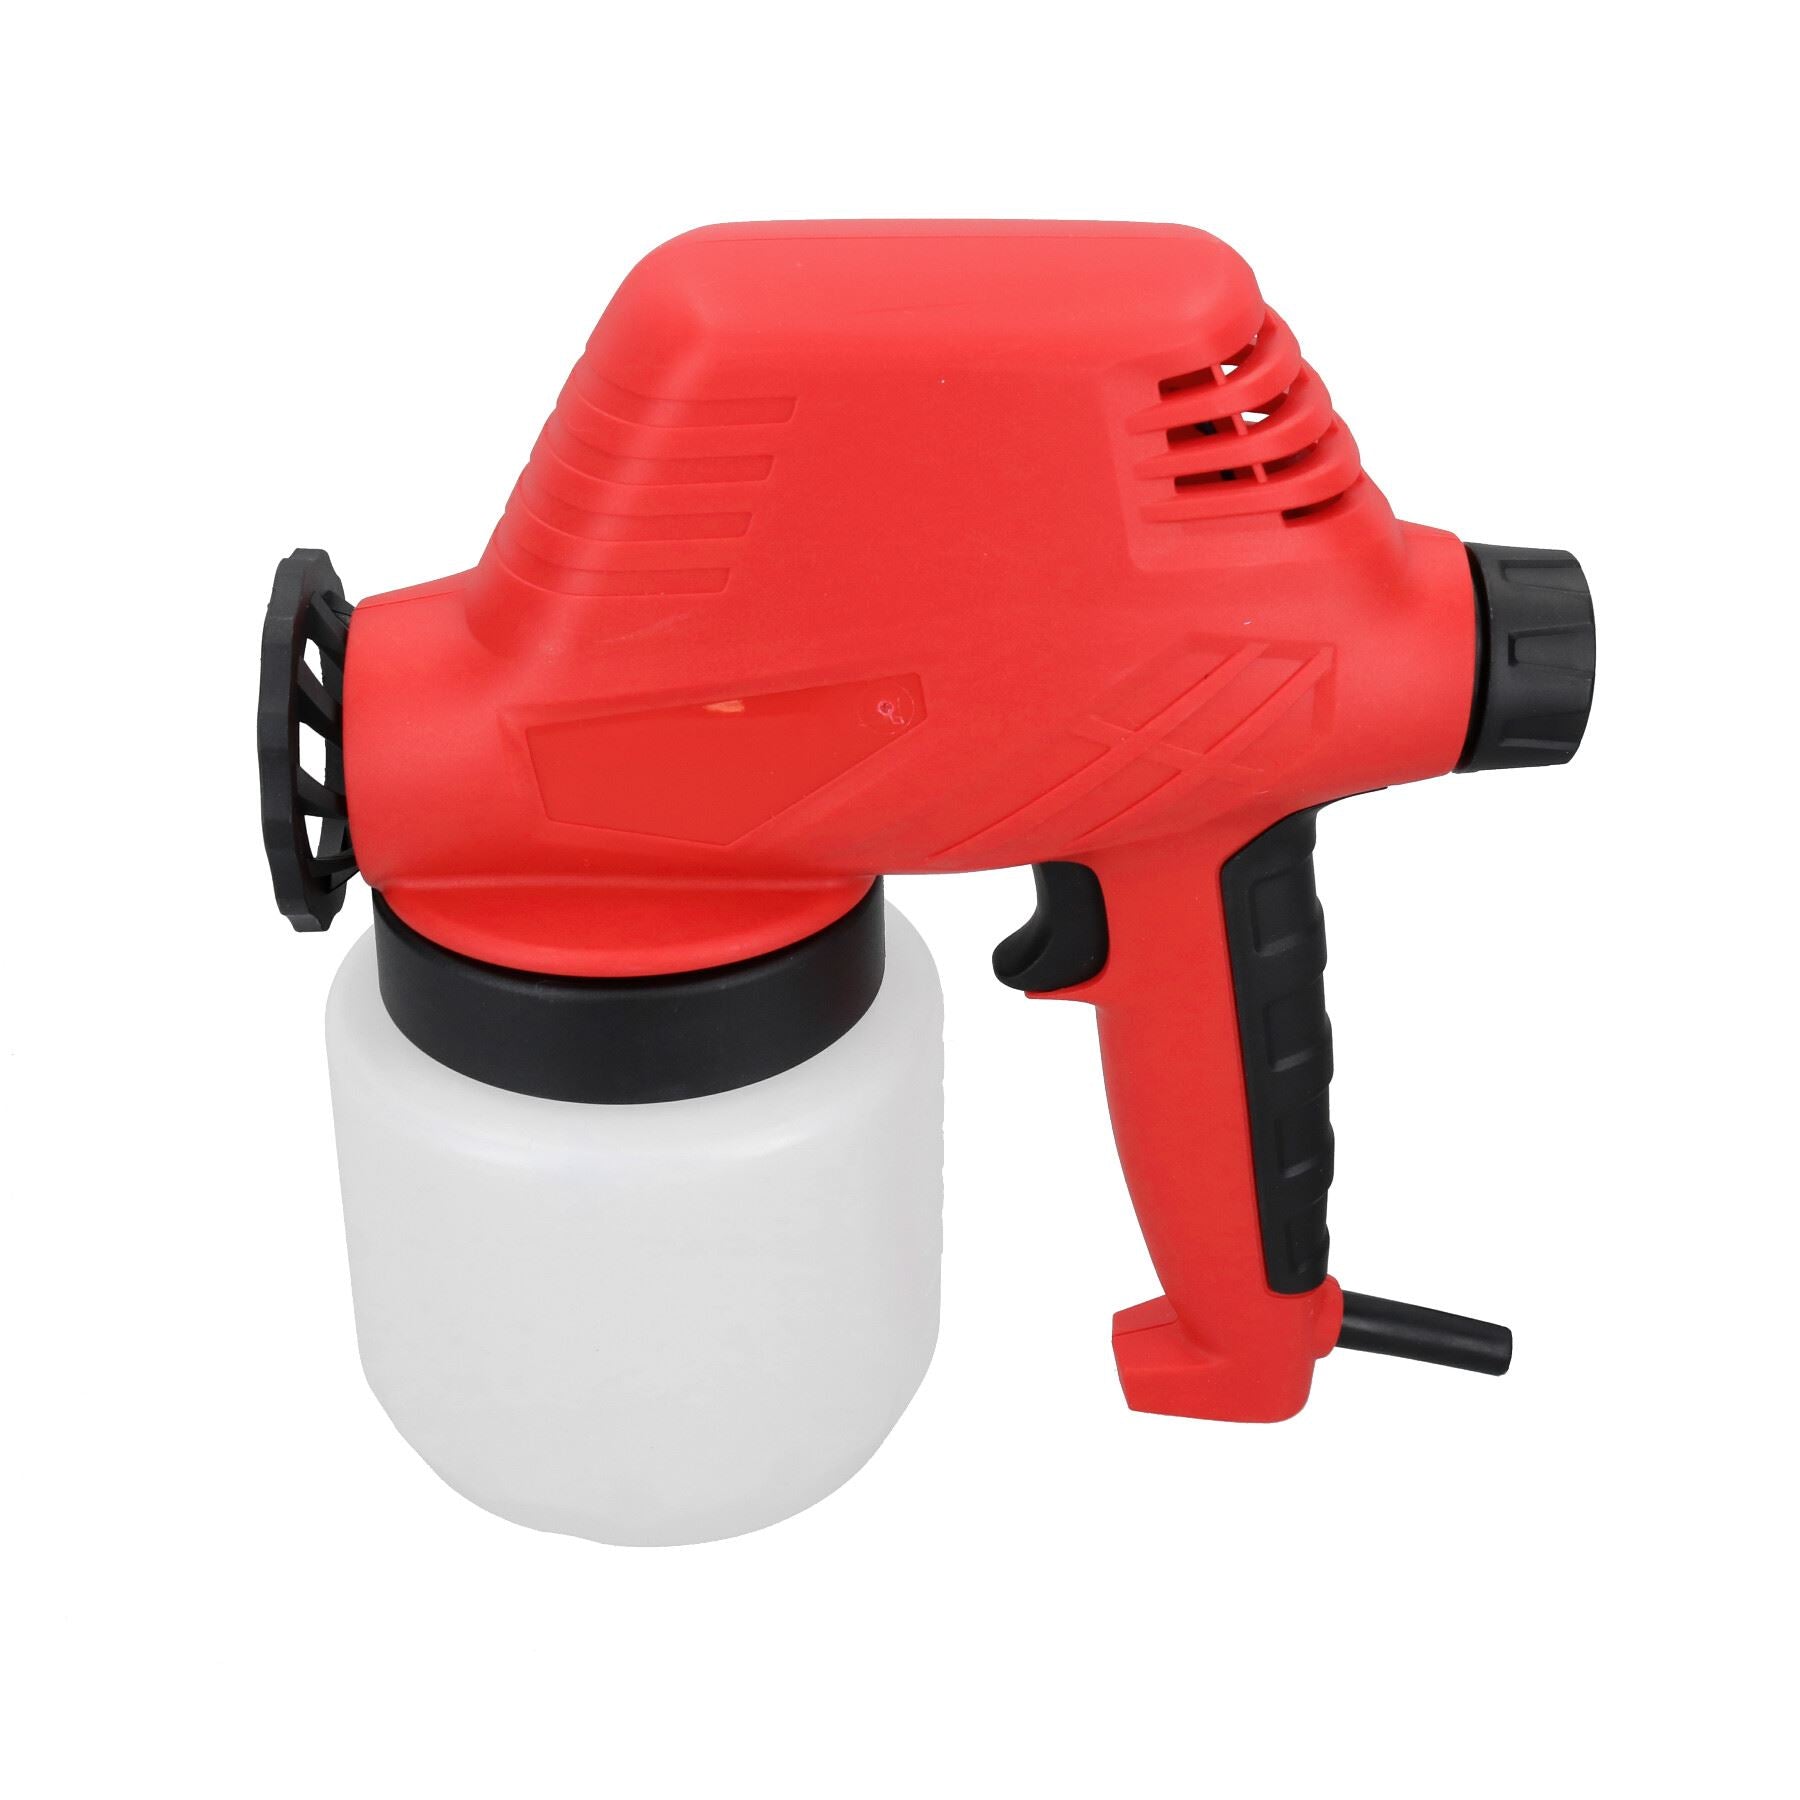 Electric Handheld Paint Sprayer Painting Spray Gun for Fences Sheds 800ml Cup